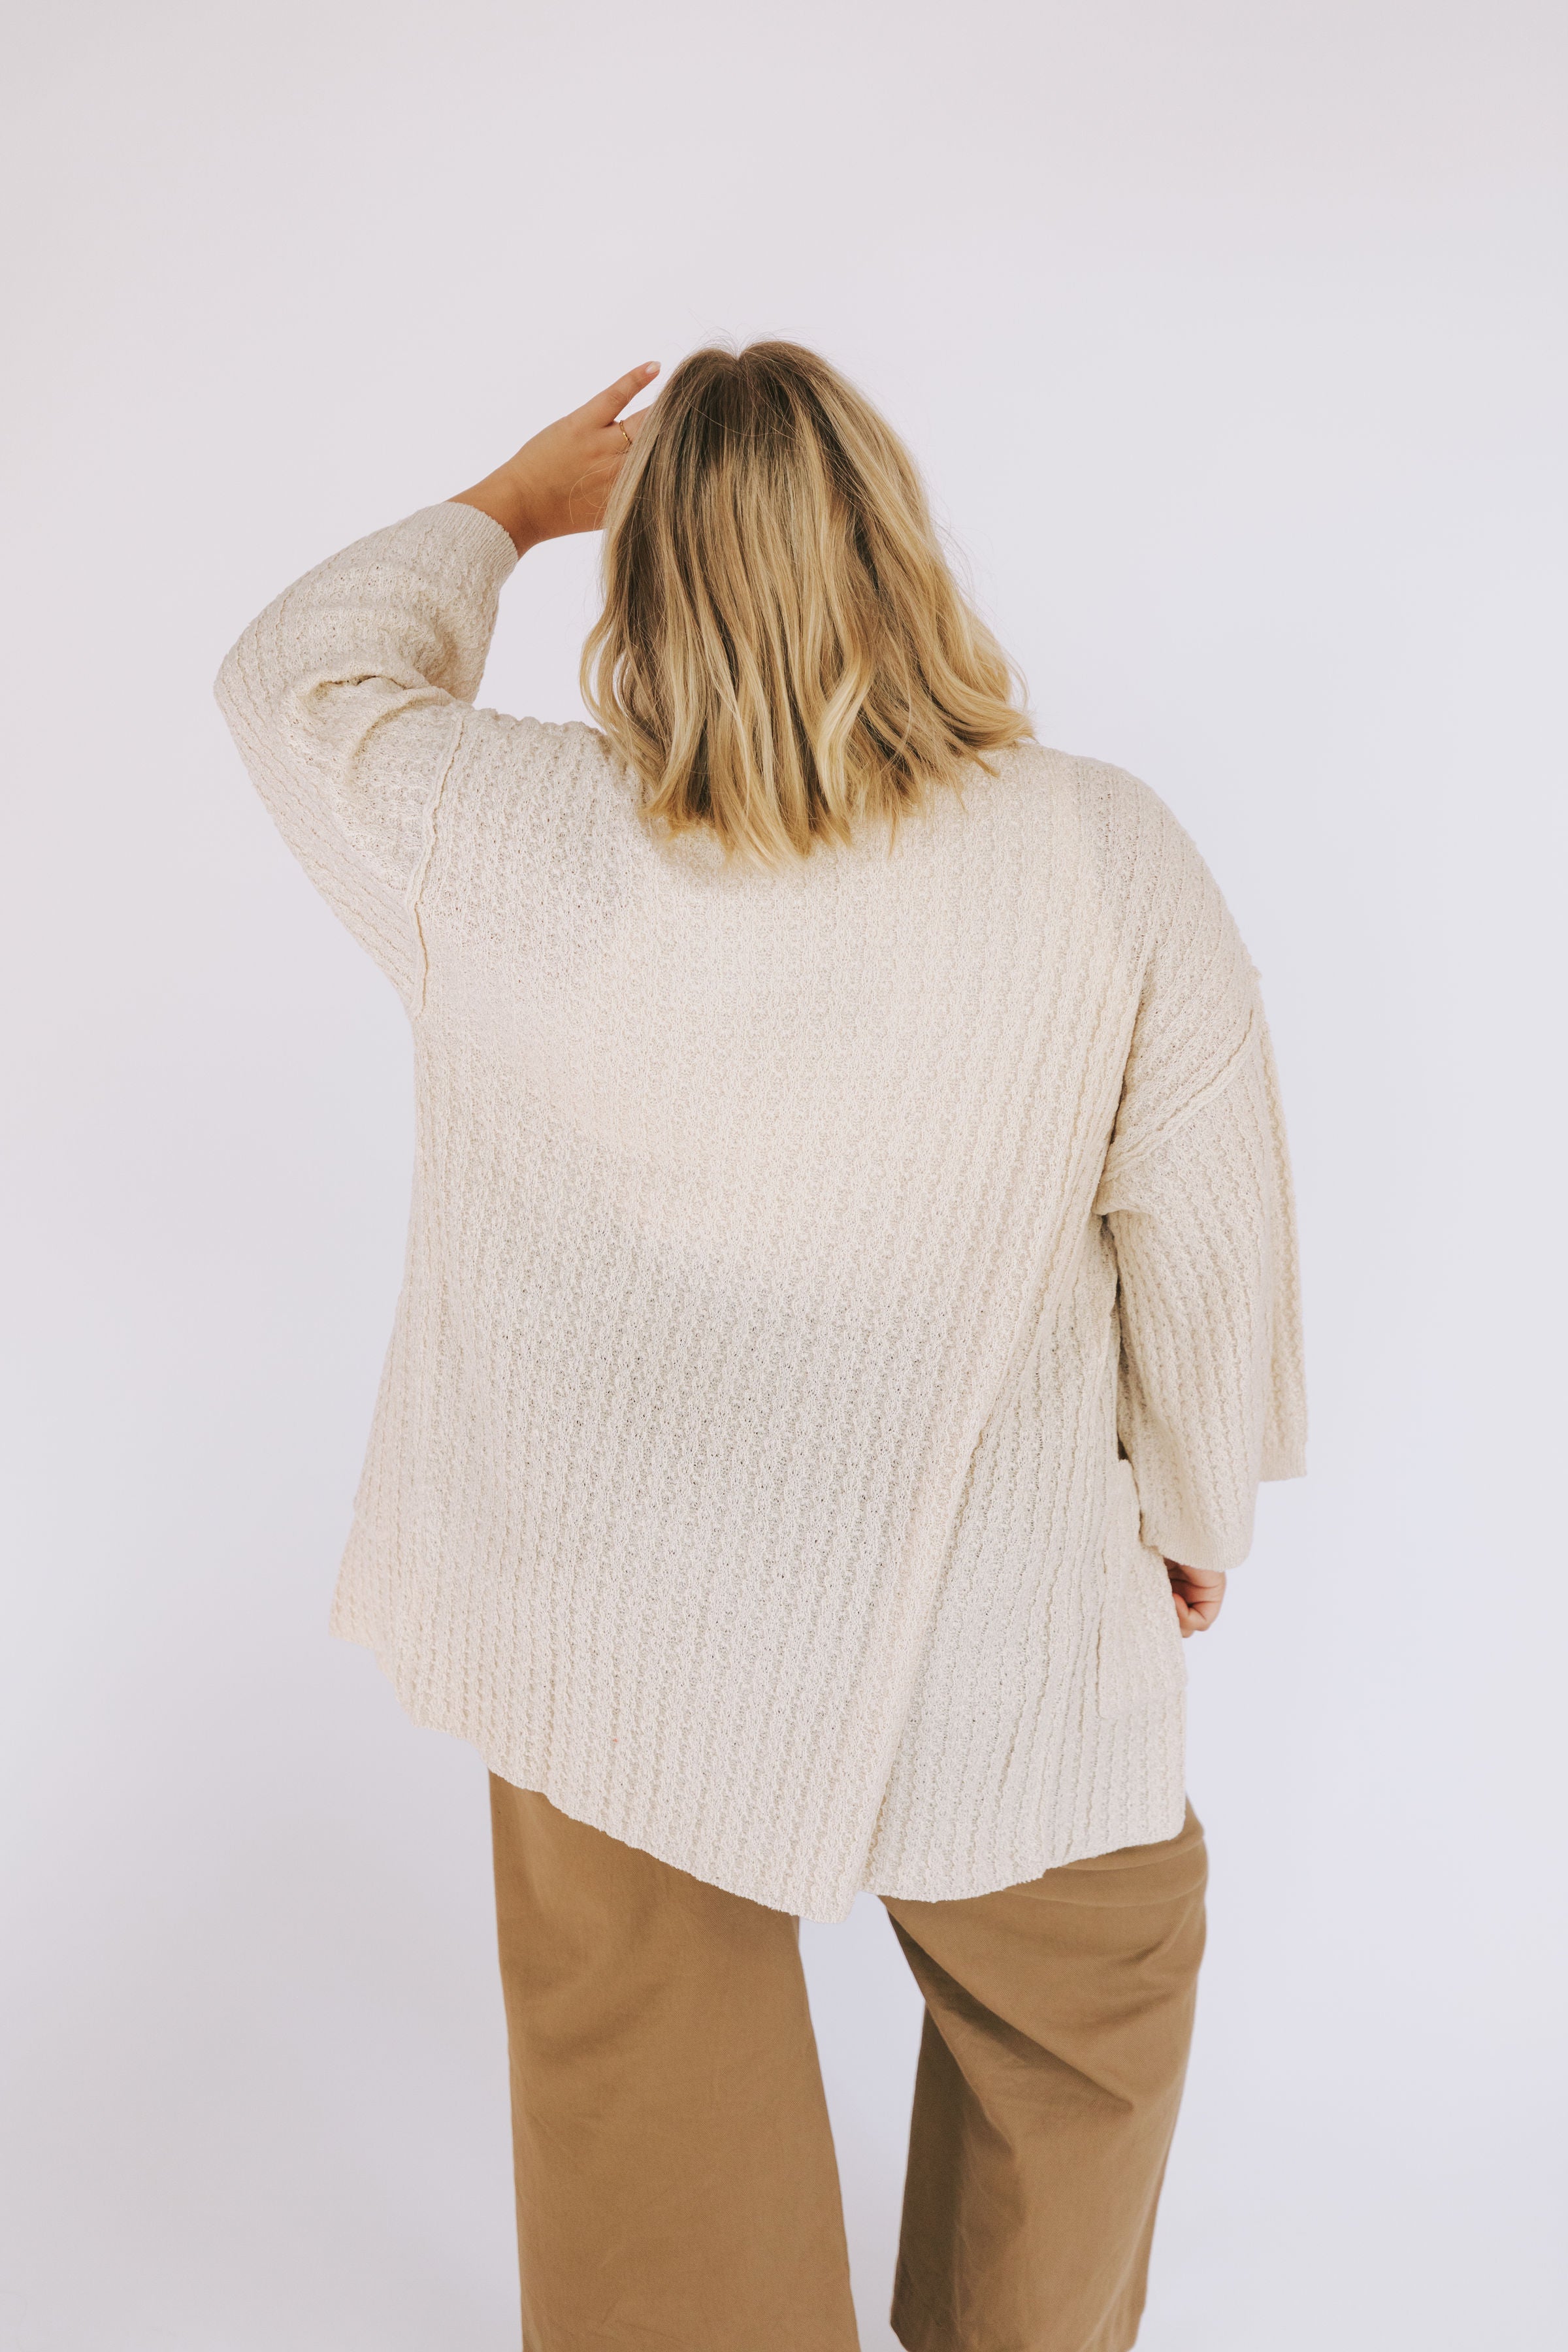 PLUS SIZE - On The Fence Cardigan